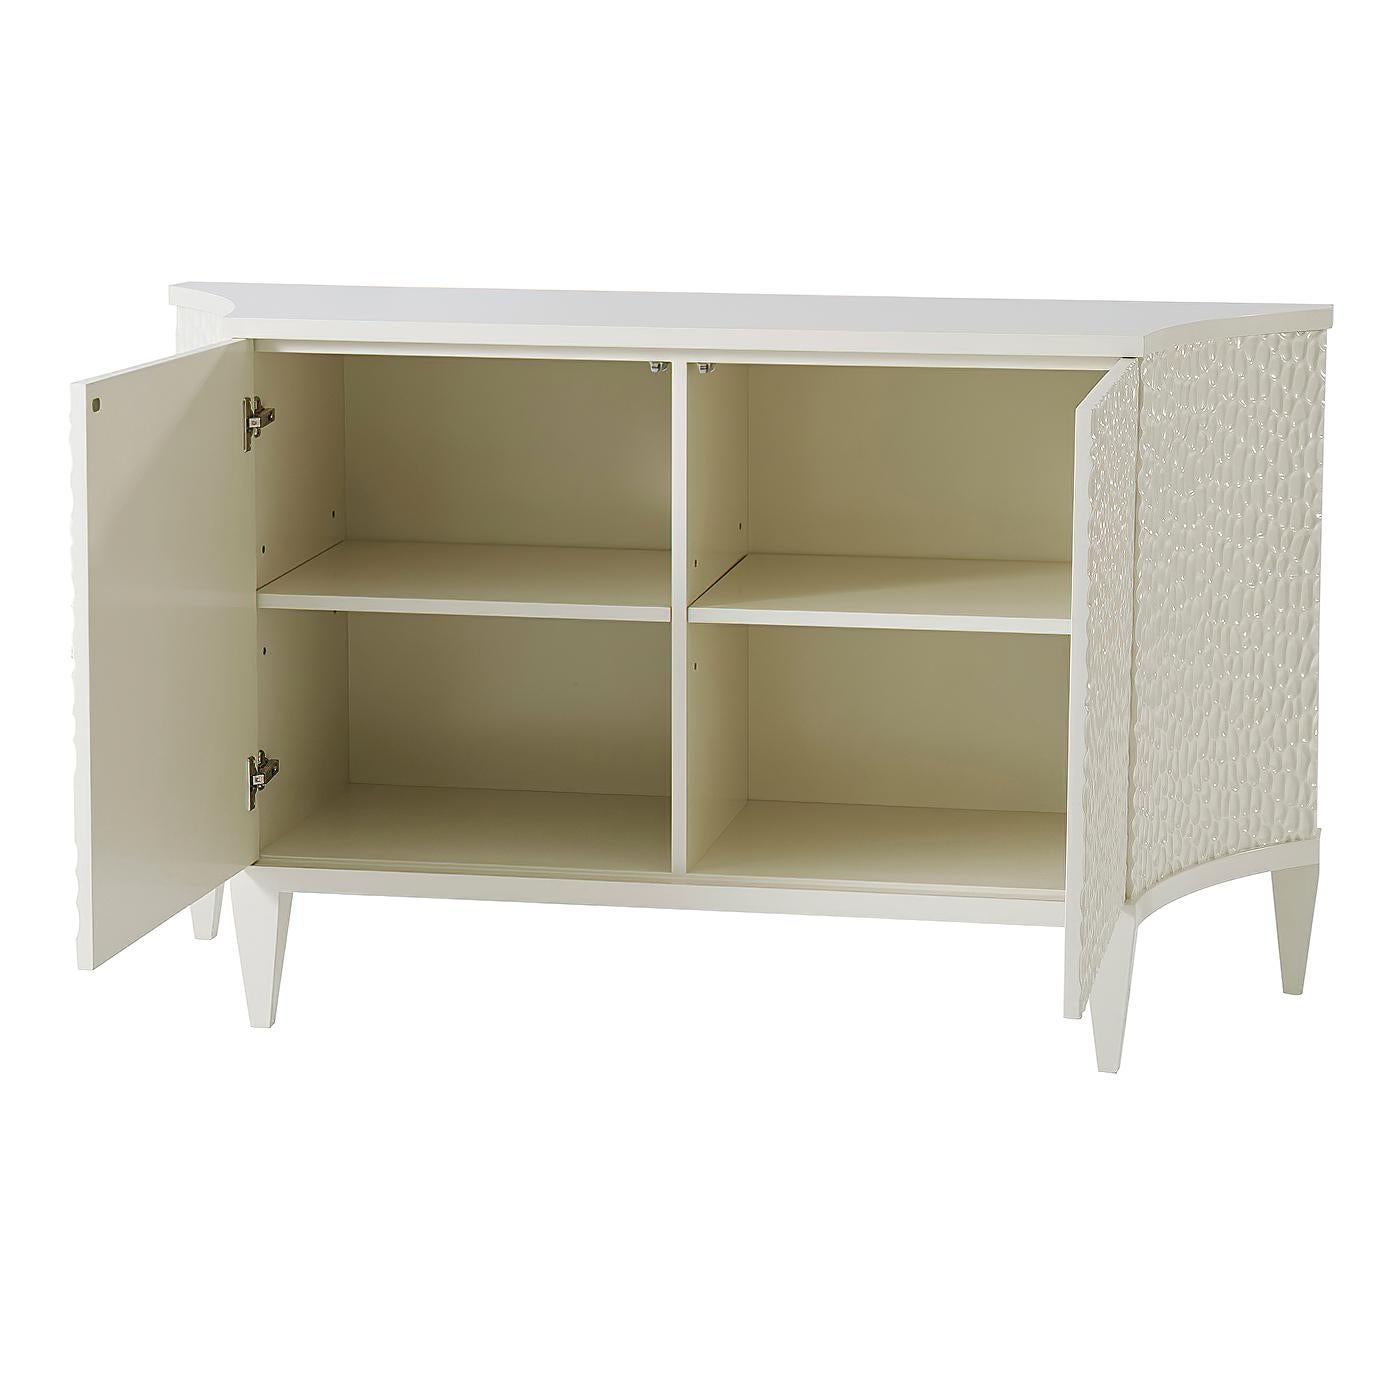 Modern white chip carved door cabinet with two section interior with an adjustable shelf to each section.
Dimensions: 60